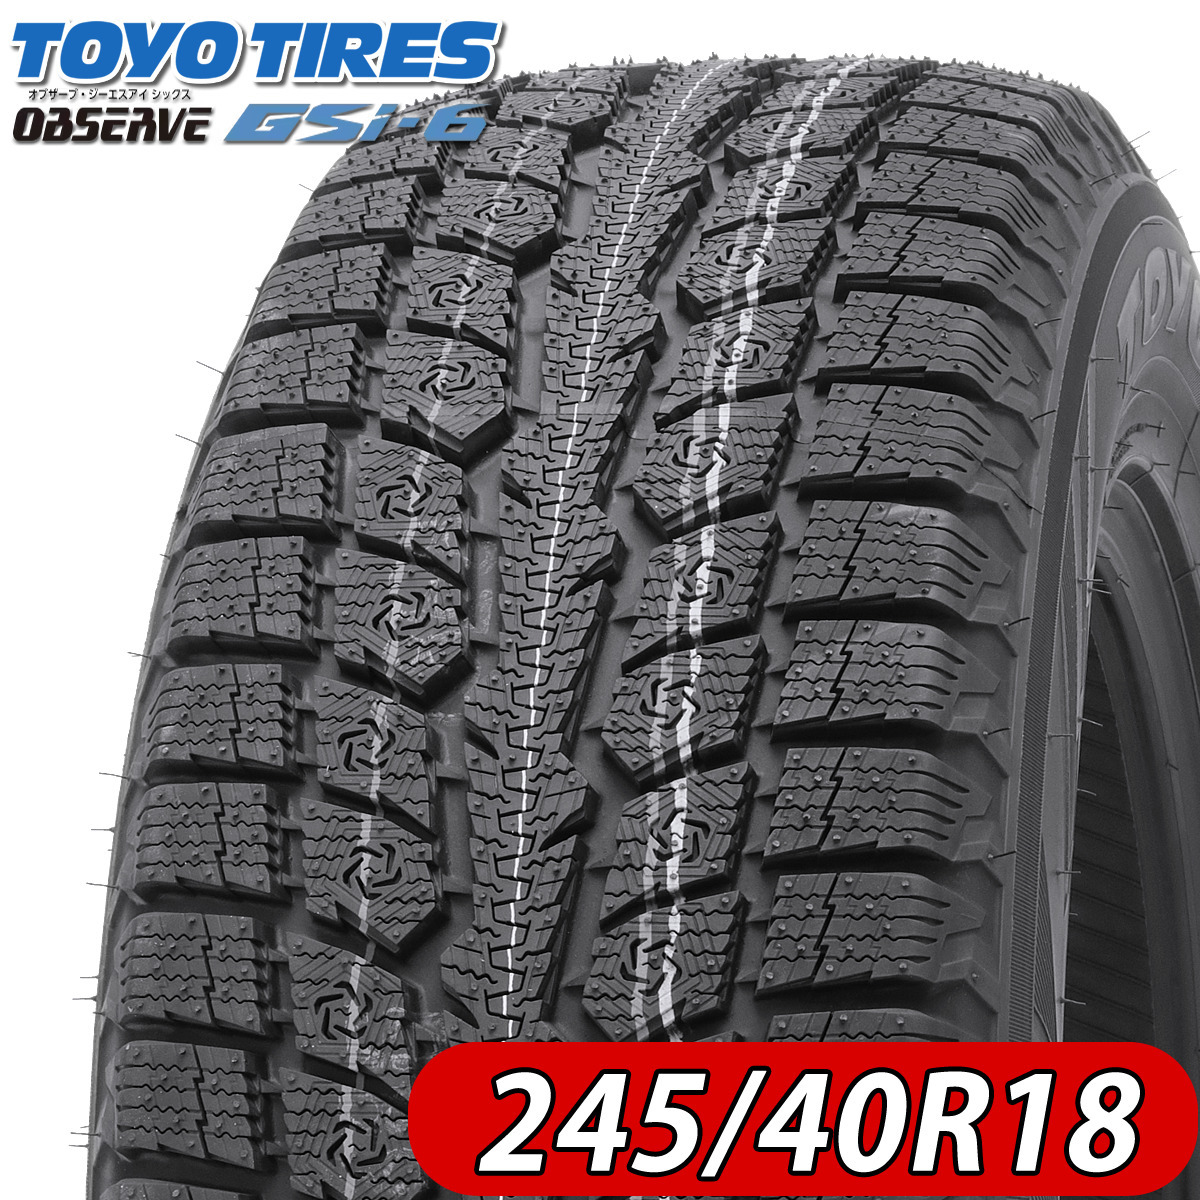 2023 year made new goods 1 pcs price company addressed to free shipping 245/40R18 97V winter TOYO Toyo OBSERVE GSi-6 Lancer Evolution Lexus Fairlady Z special price NO,TY1853